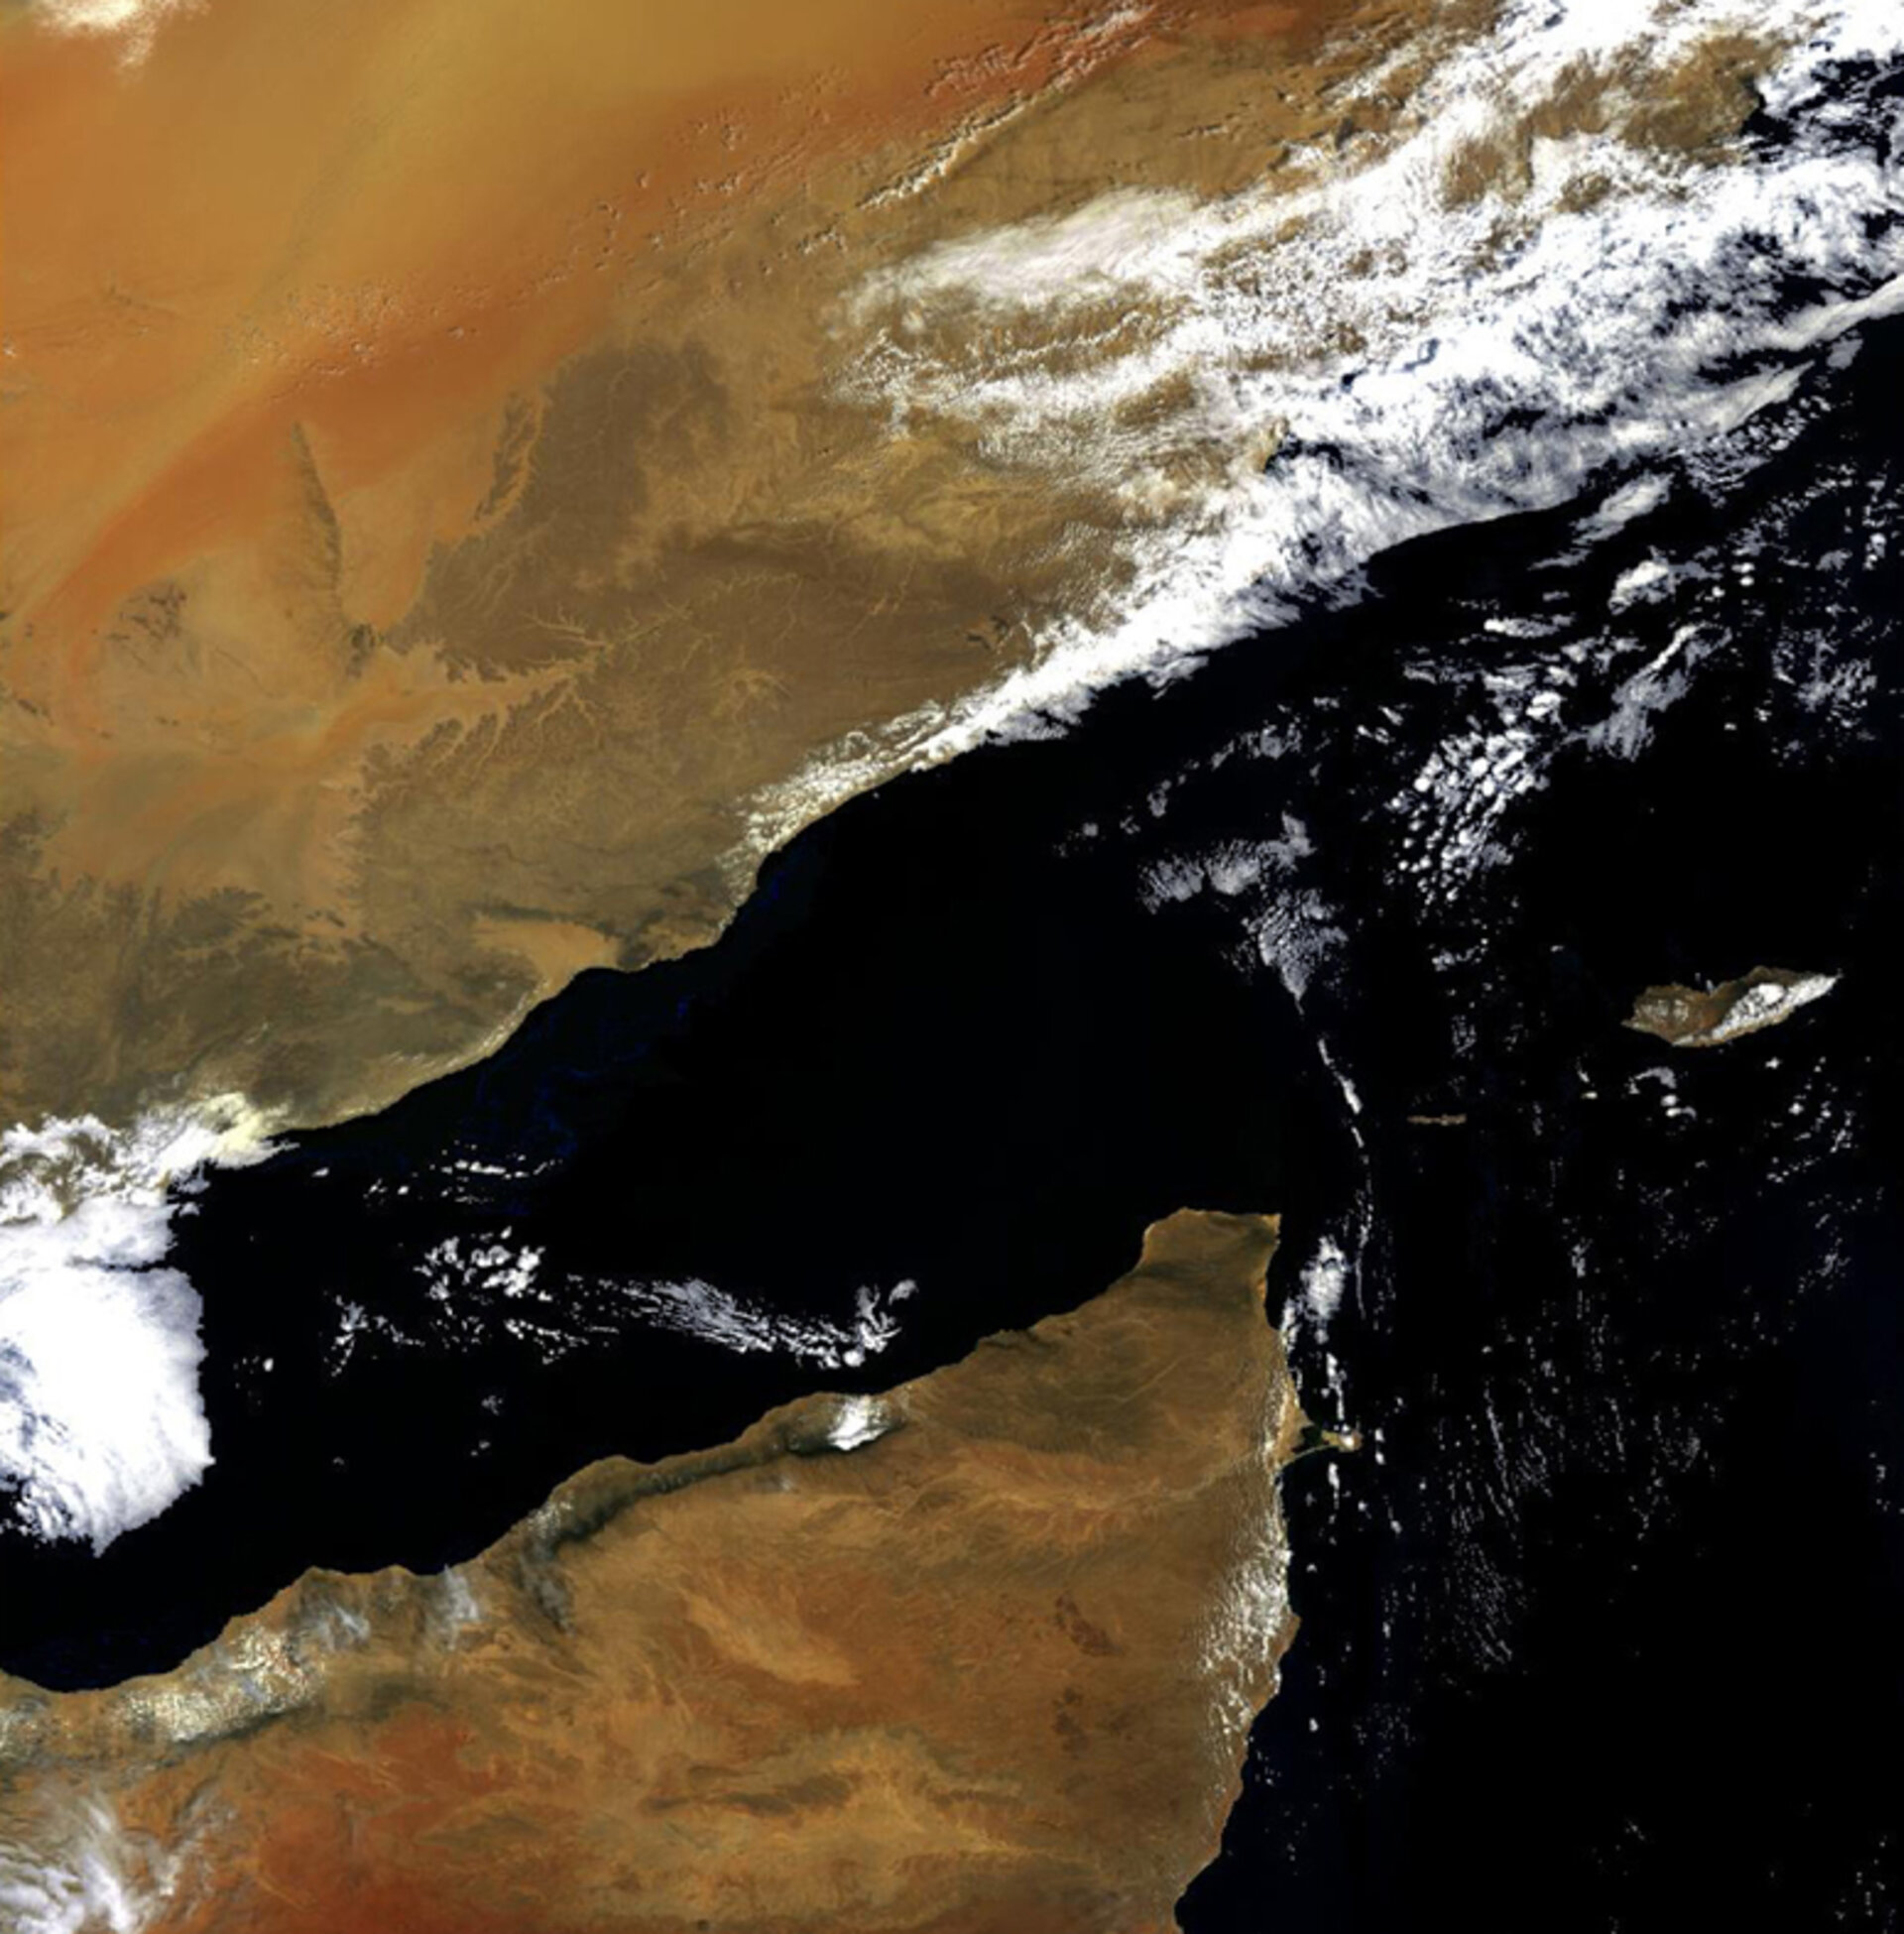 Envisat image of the Gulf of Aden